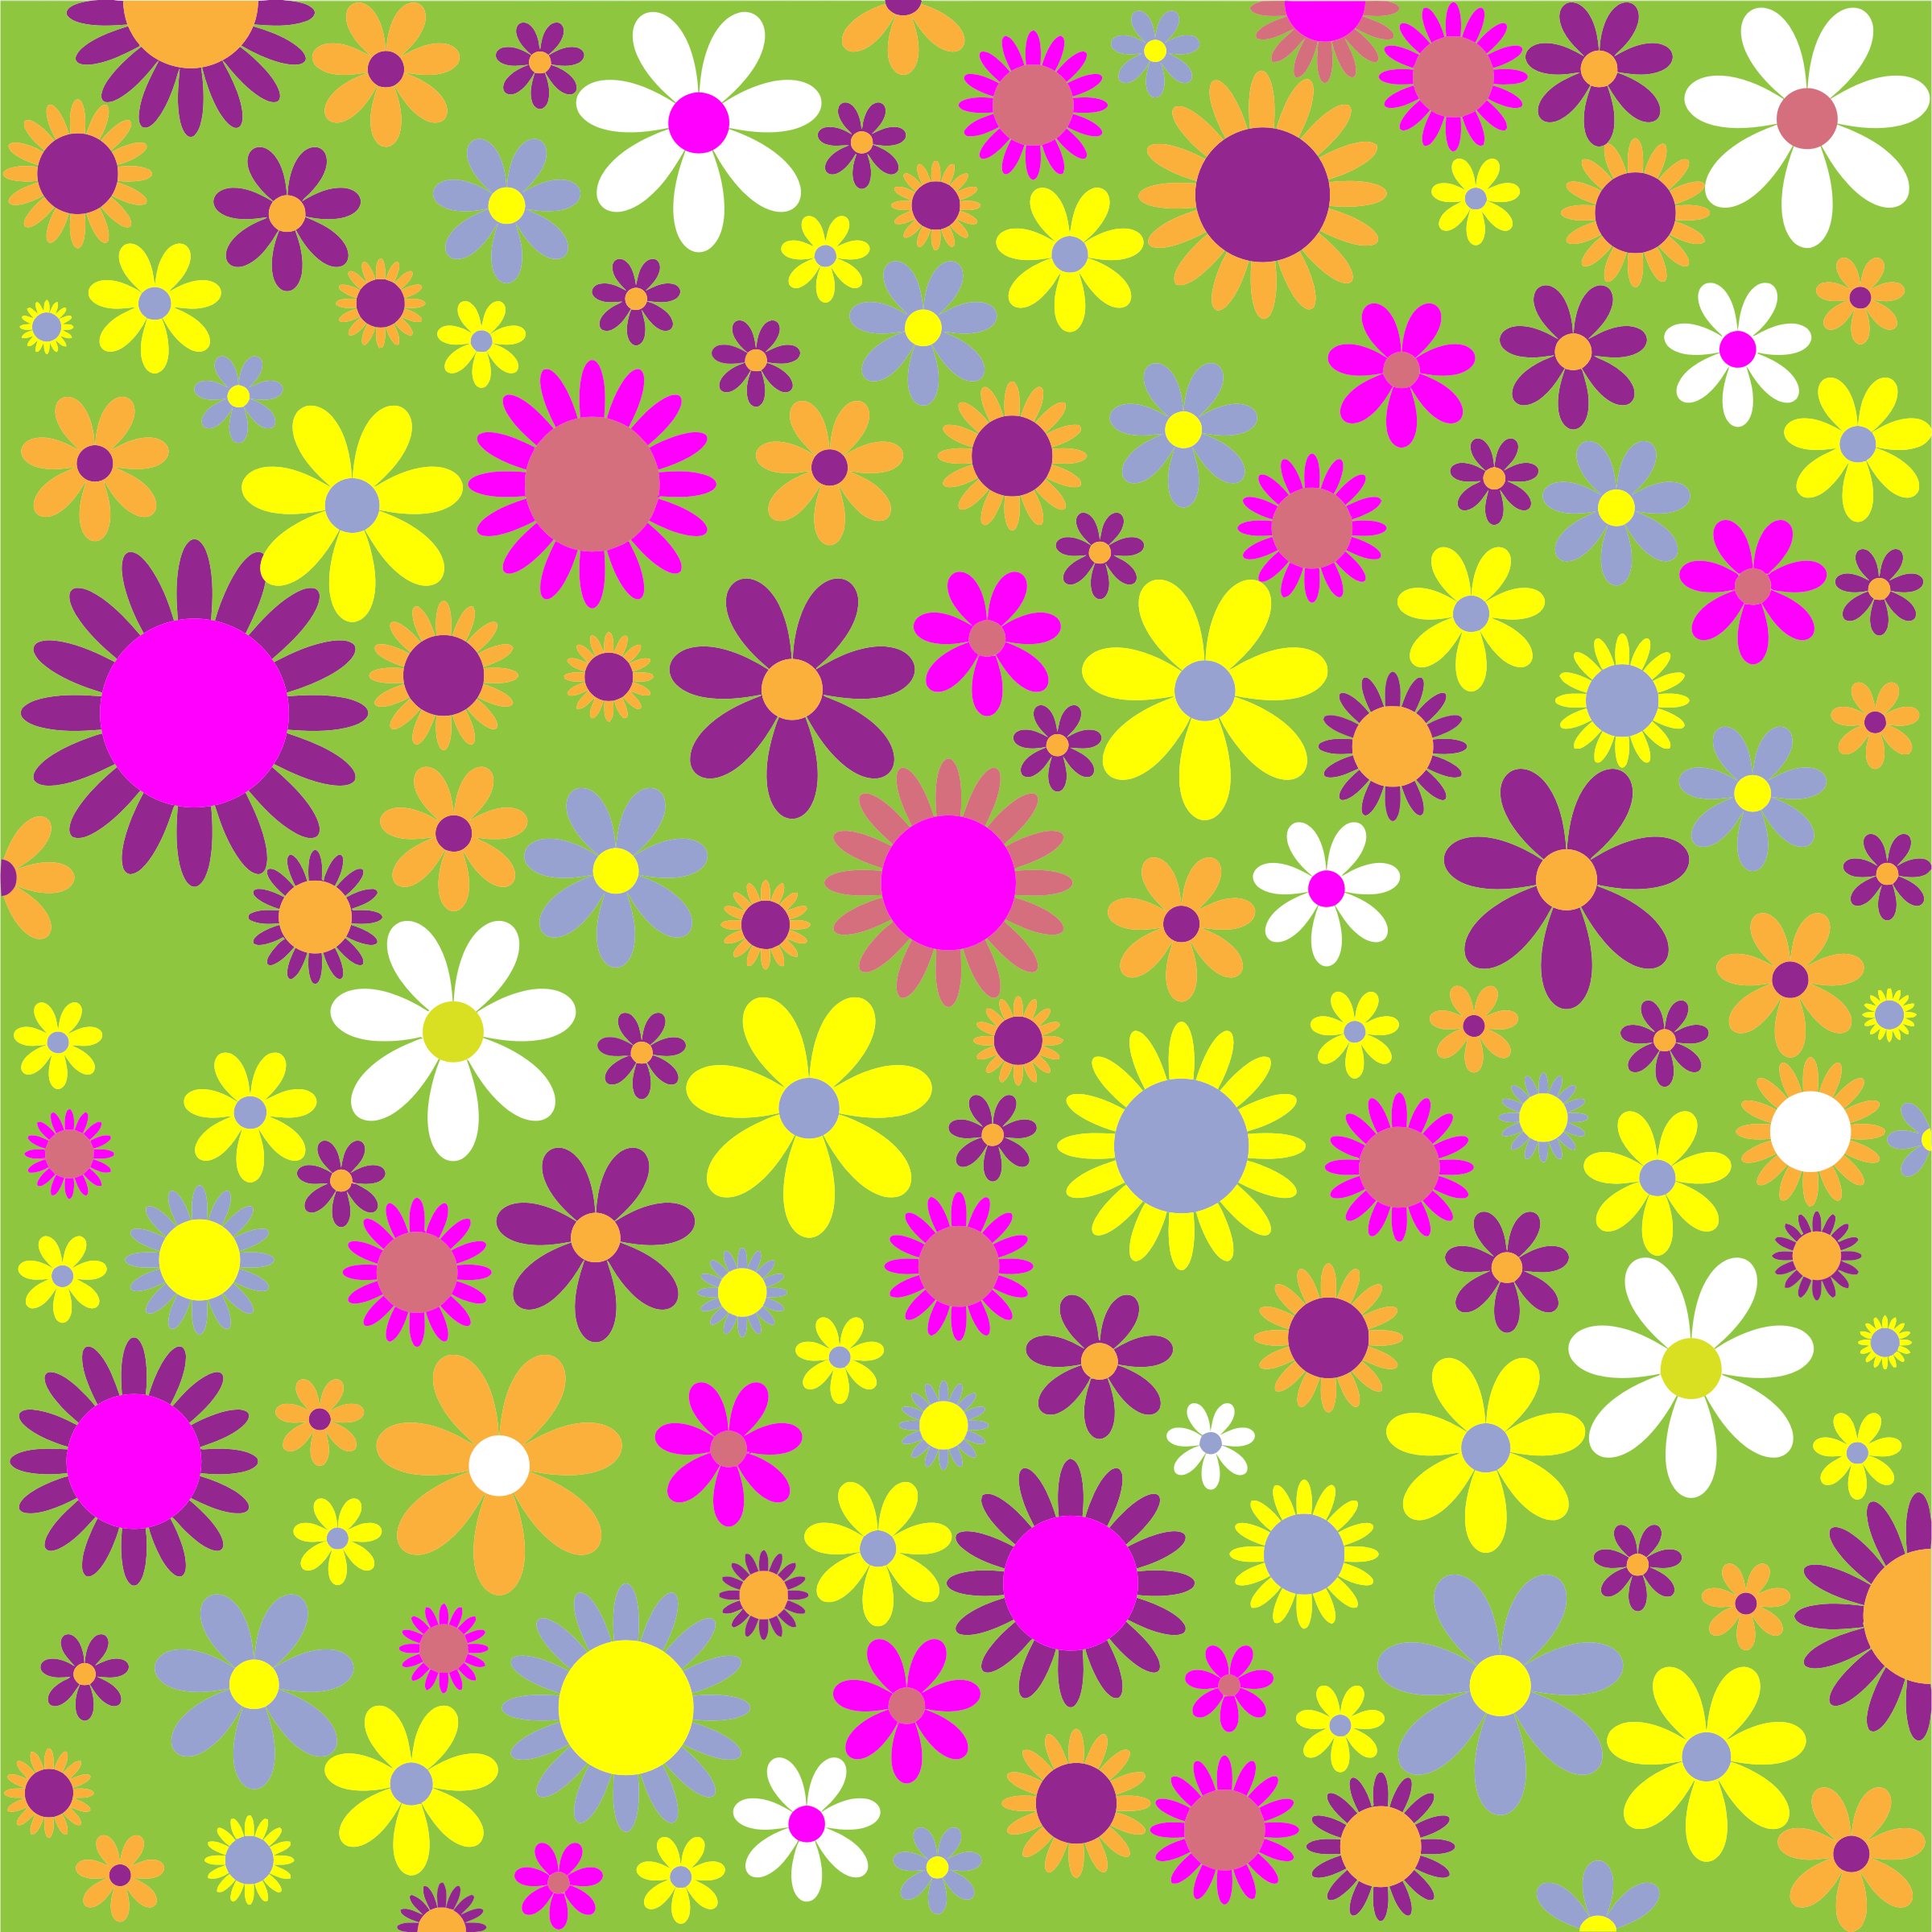 Free background floral.